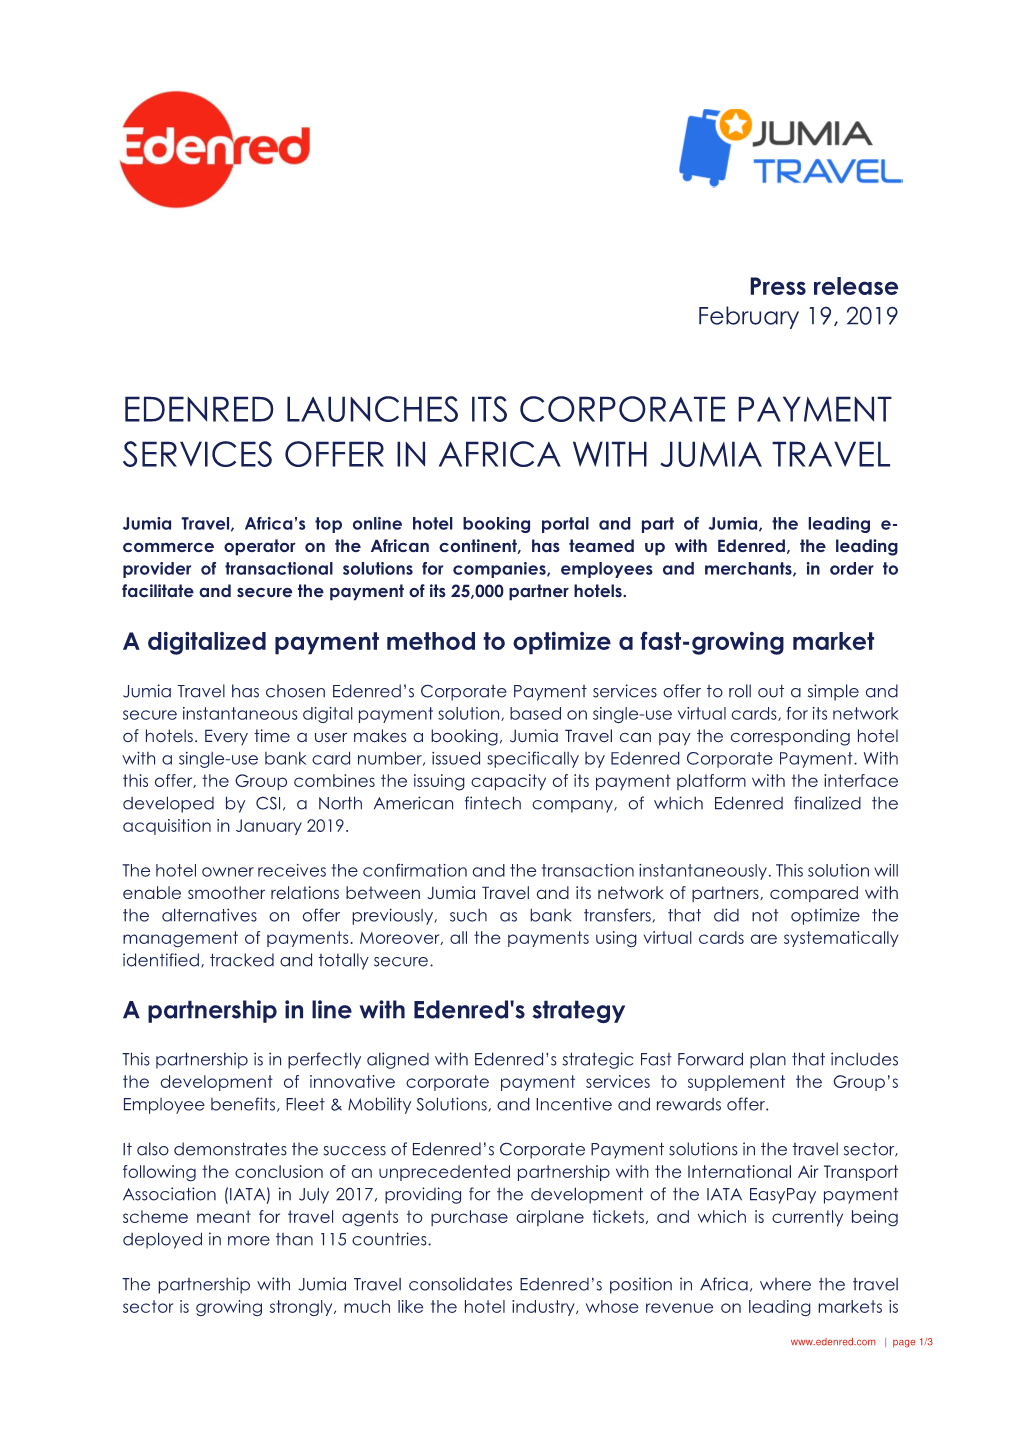 Edenred Launches Its Corporate Payment Services Offer in Africa with Jumia Travel